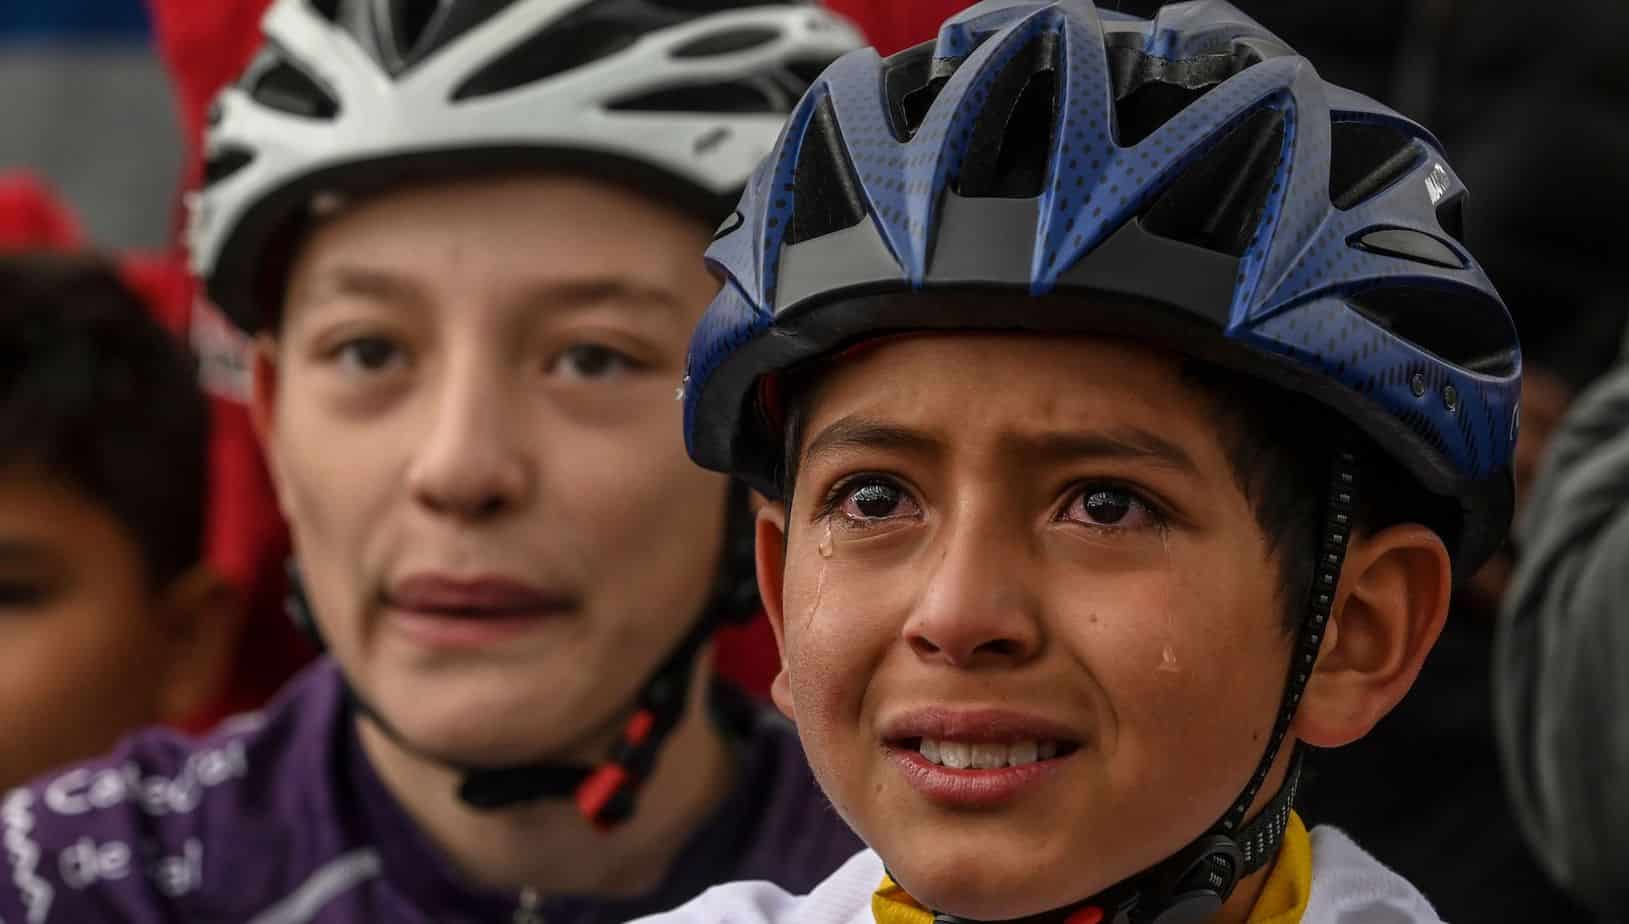 Julian-Gomez-who-went-viral-for-sharing-tears-of-happiness-when-Bernal-won-yellow-jersey-in-2019-Tour-de-France.